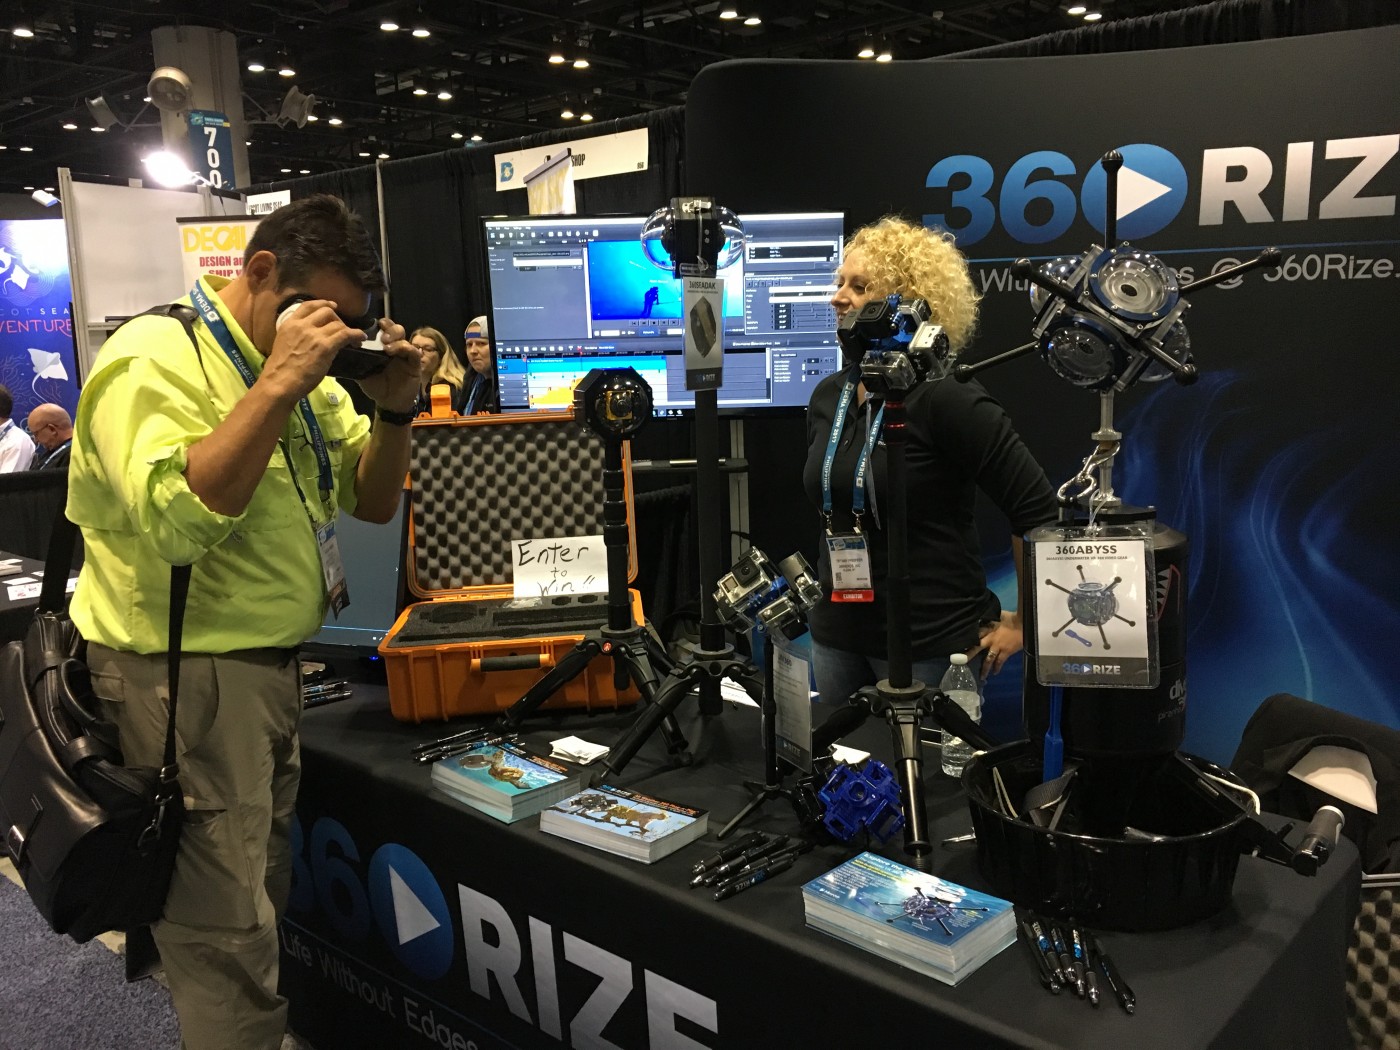 360Rize Booth